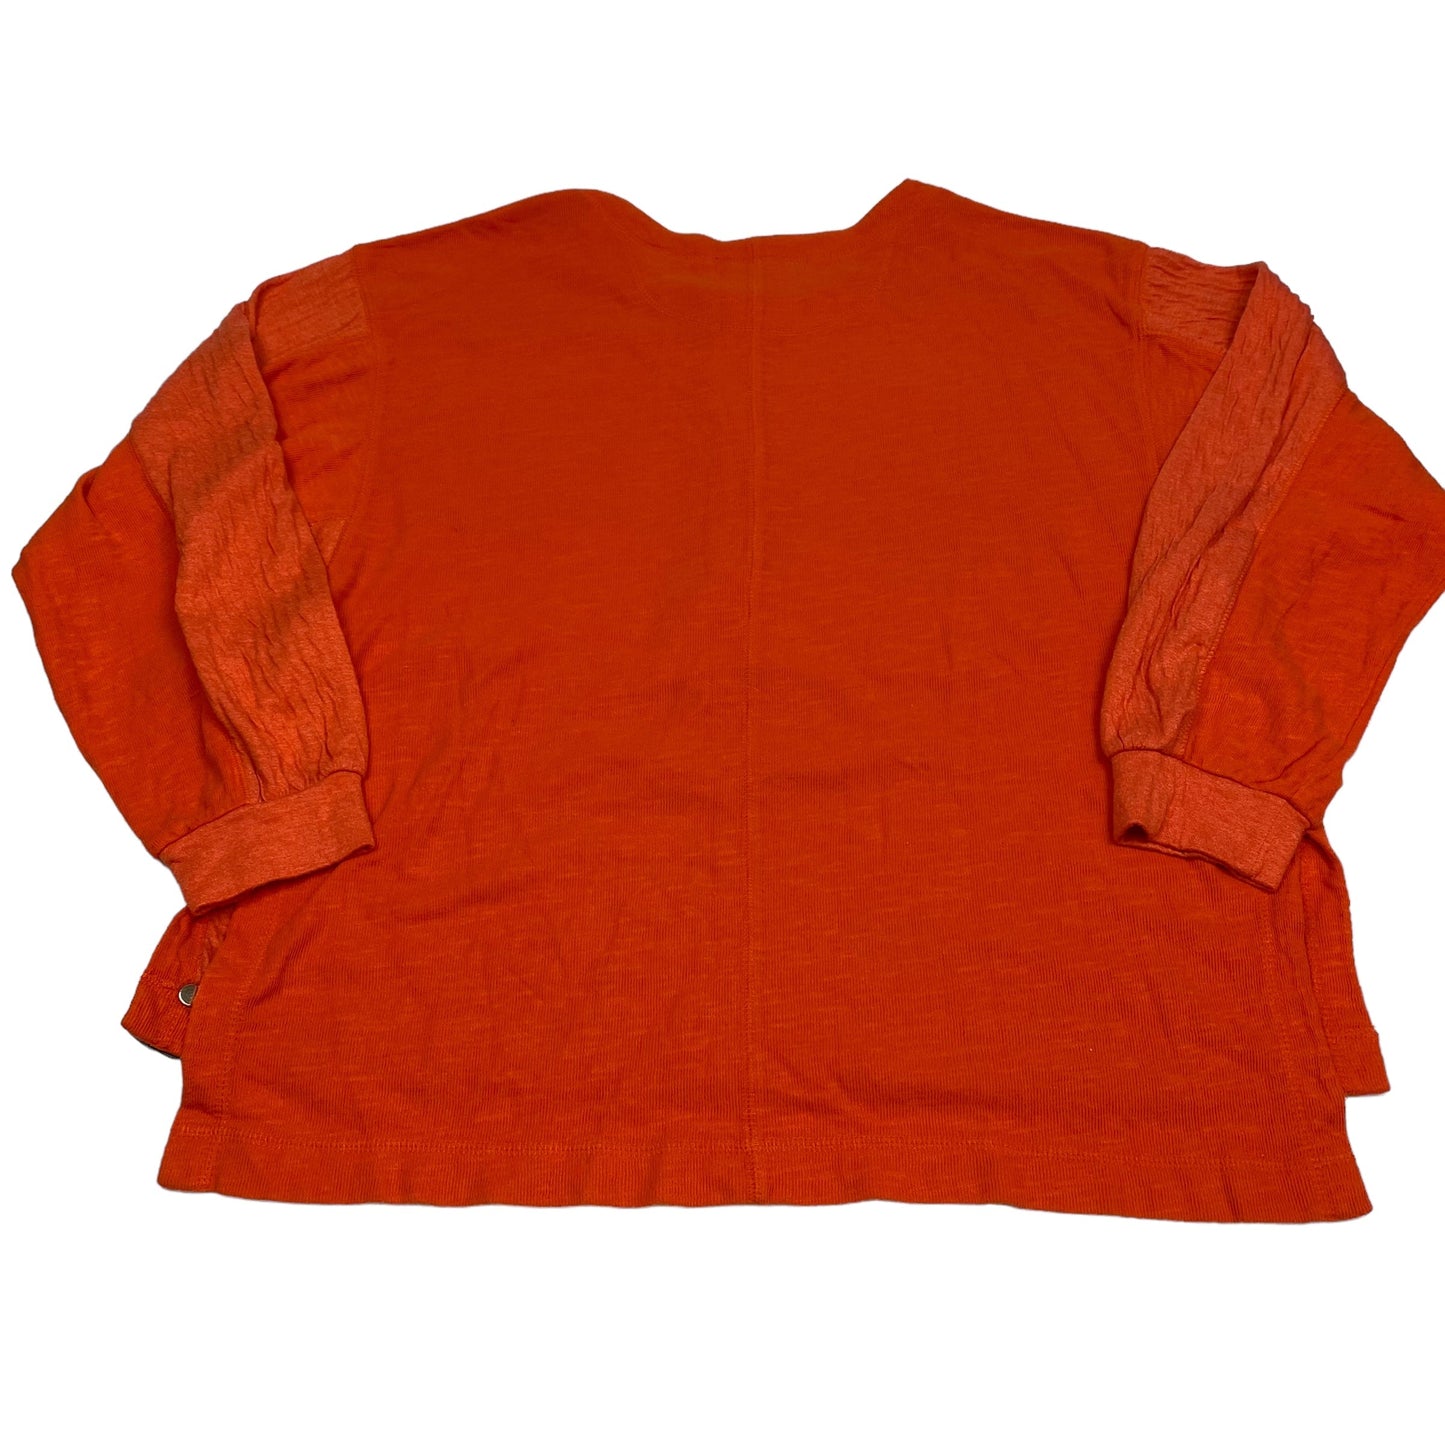 Orange Top Long Sleeve We The Free, Size L